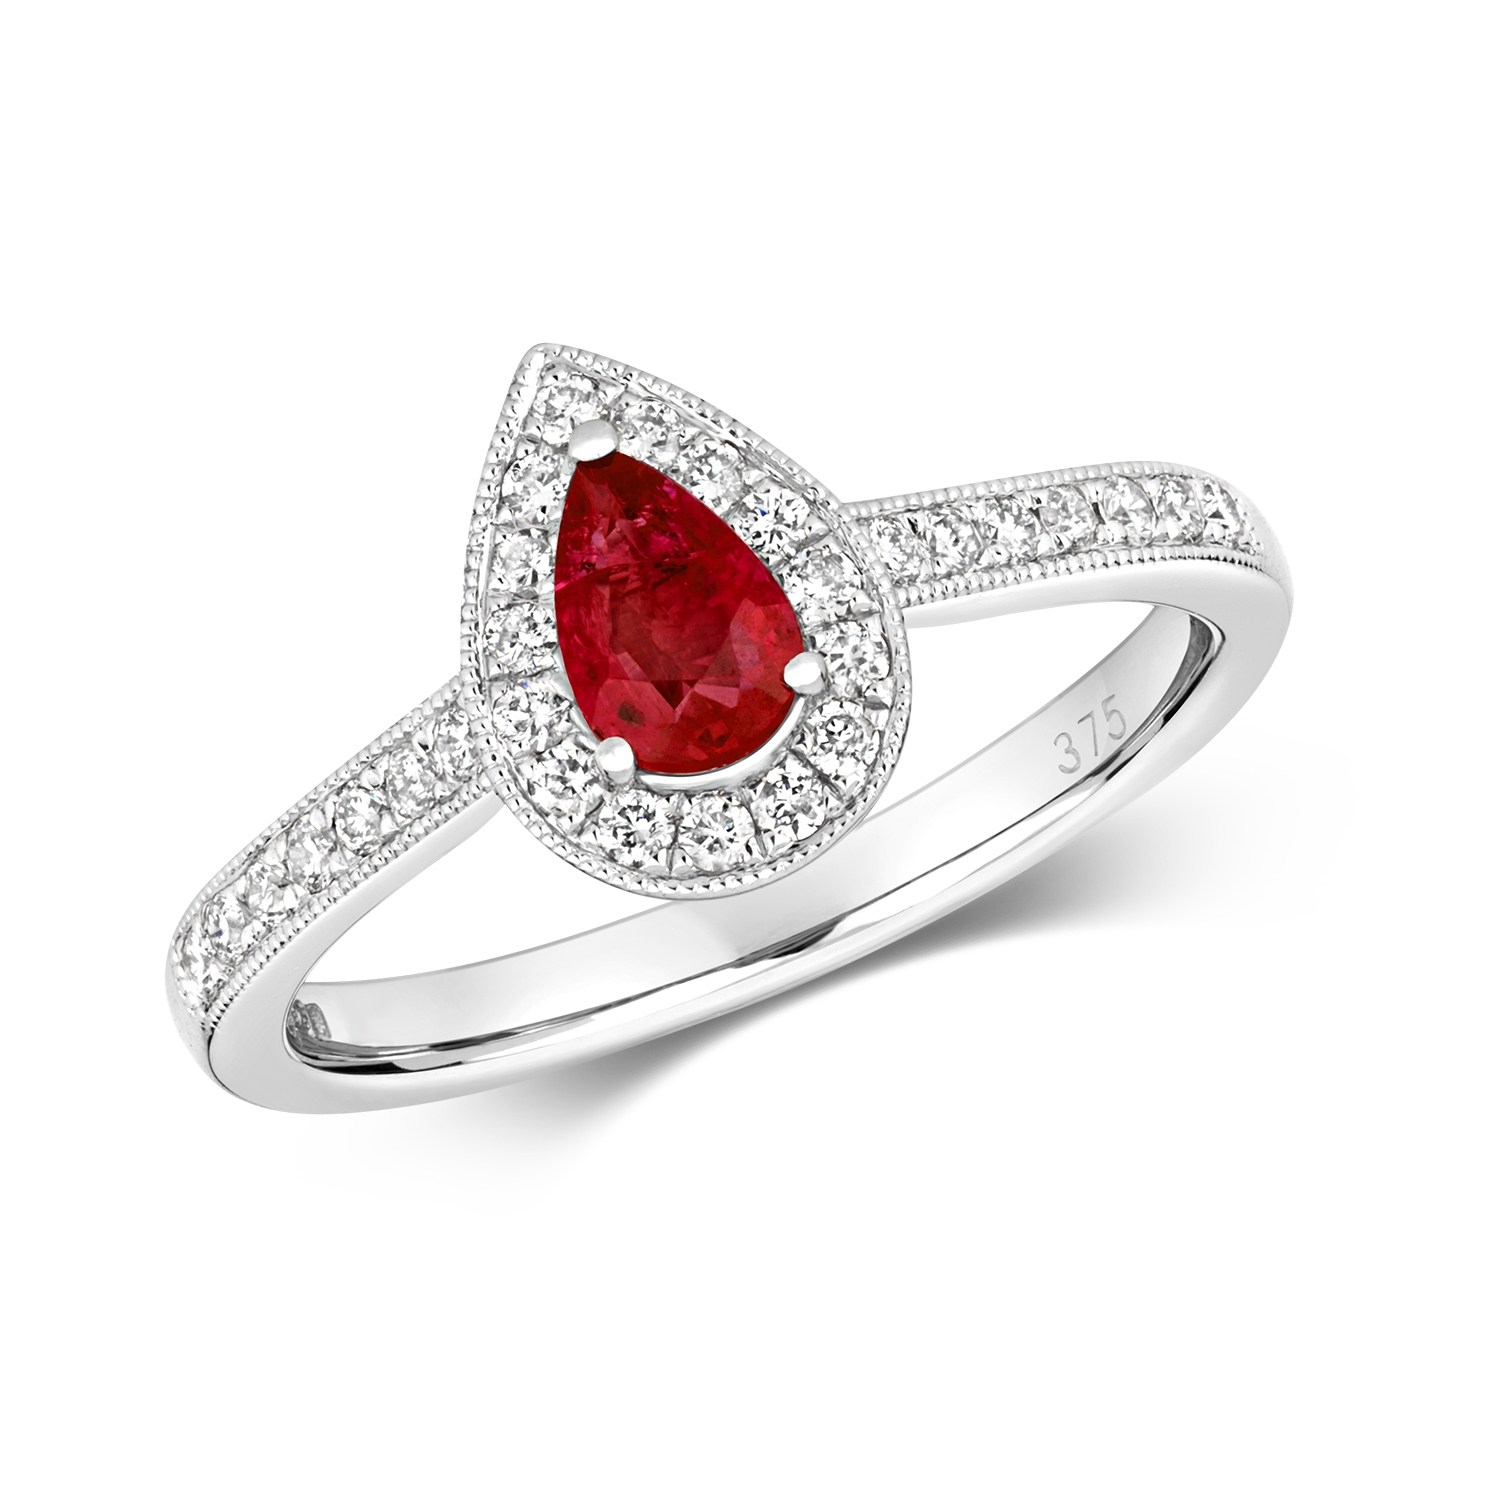 3Ct Lab-Created Pear Cut Red Ruby Engagement Ring 14K White Gold Plated  Silver | eBay